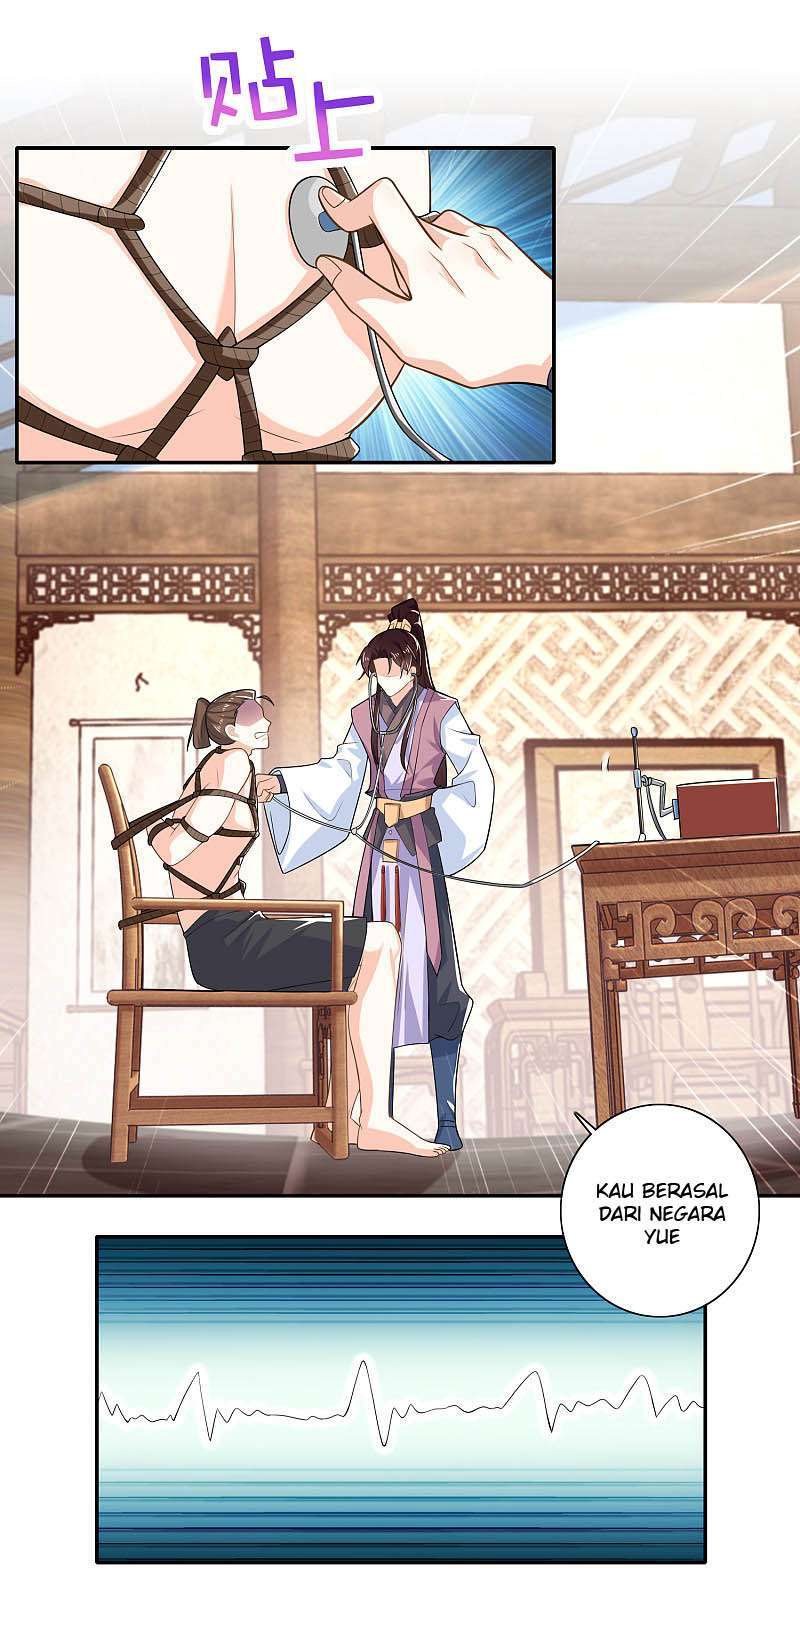 Best Son-In-Law Chapter 32